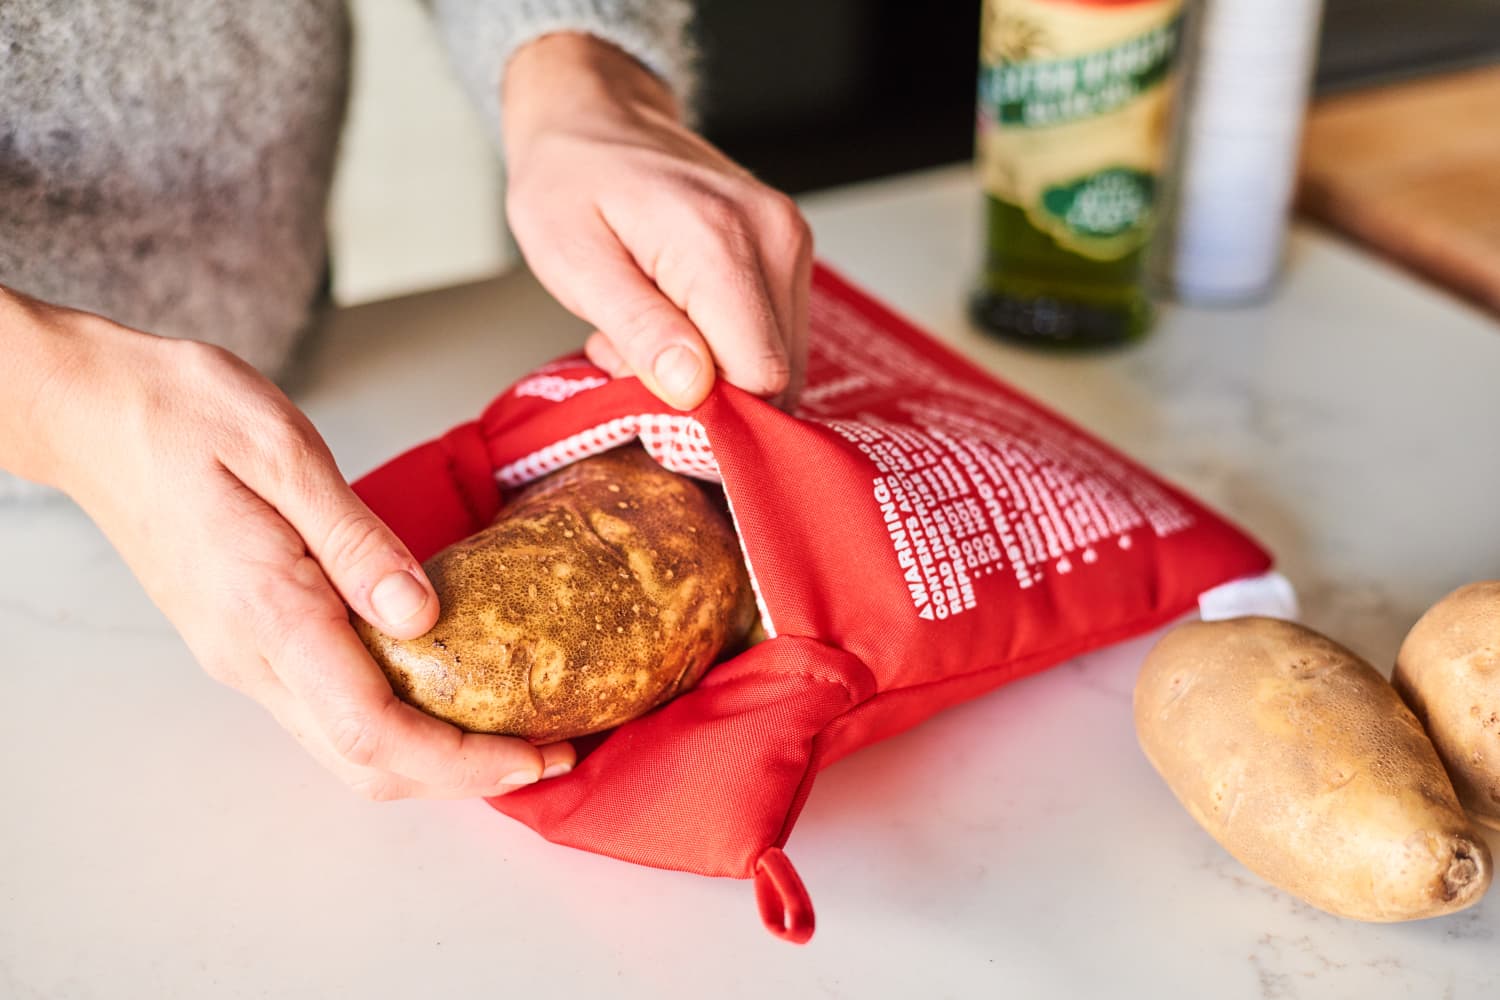 Red 4 Baked Potato Bag,You can Quickly get a Fresh and Delicious Baked Potato Saving Time and High Efficiency 